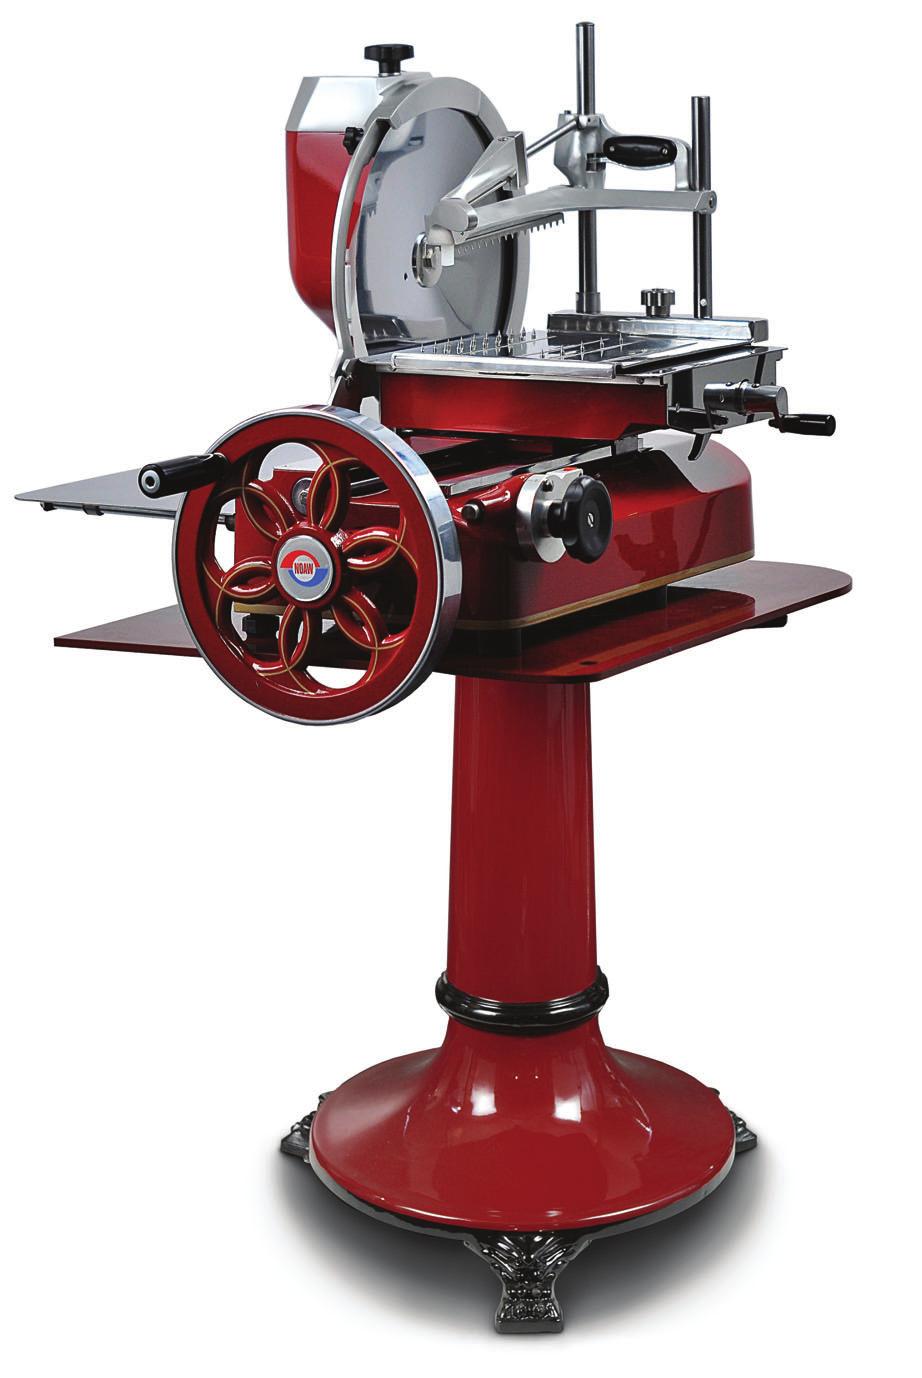 Heritage Flywheel Slicer A showpiece vertical slicer that is beautifully crafted for easy manual operation Ideal for shaving and slicing delicate cold cut meats like prosciutto Fully manual operation